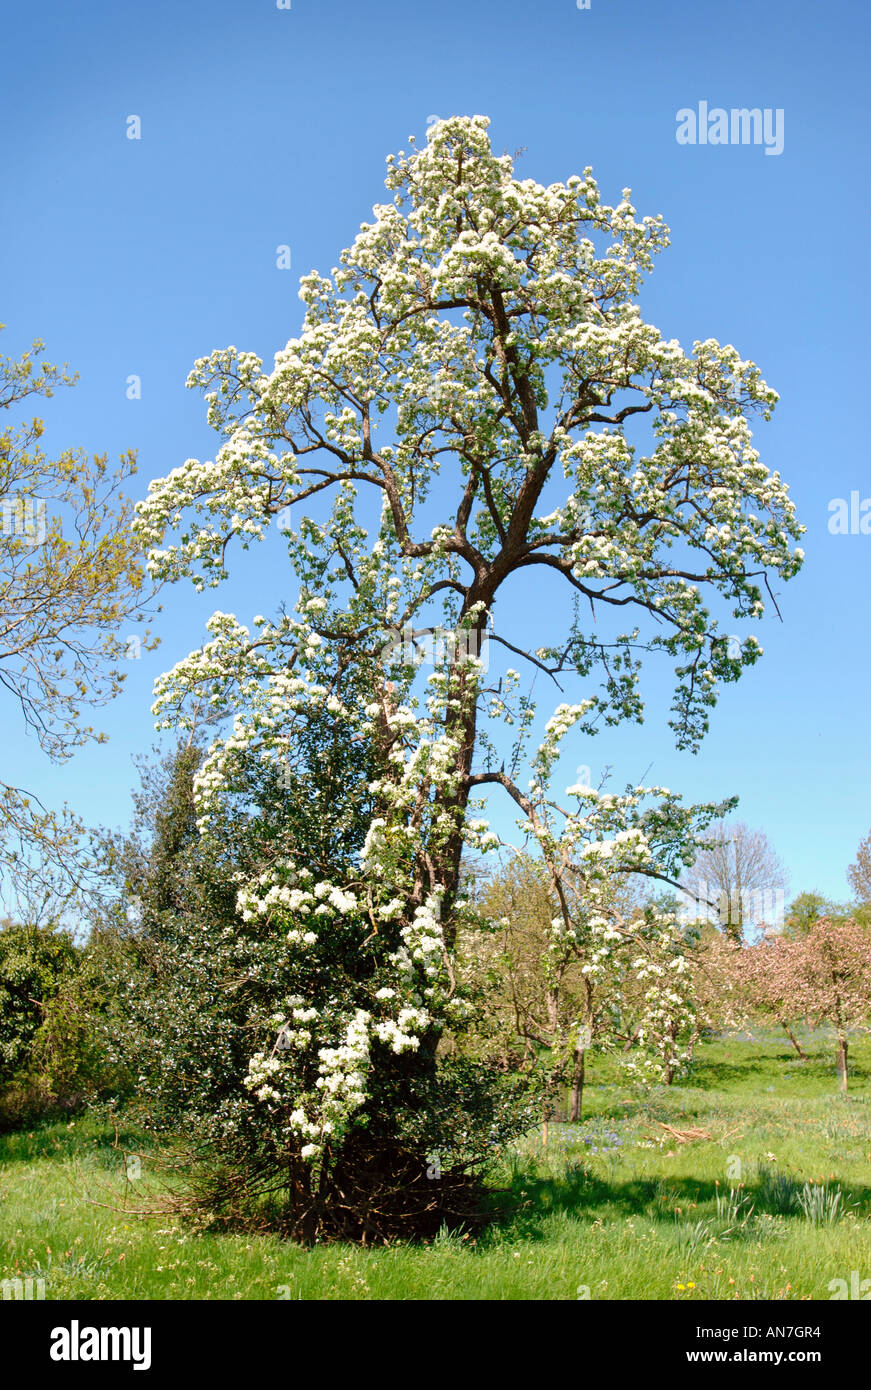 A BARLAND PERRY PEAR TREE IN AN ORCHARD IN GLOUCESTERSHIRE ENGLAND UK Stock Photo